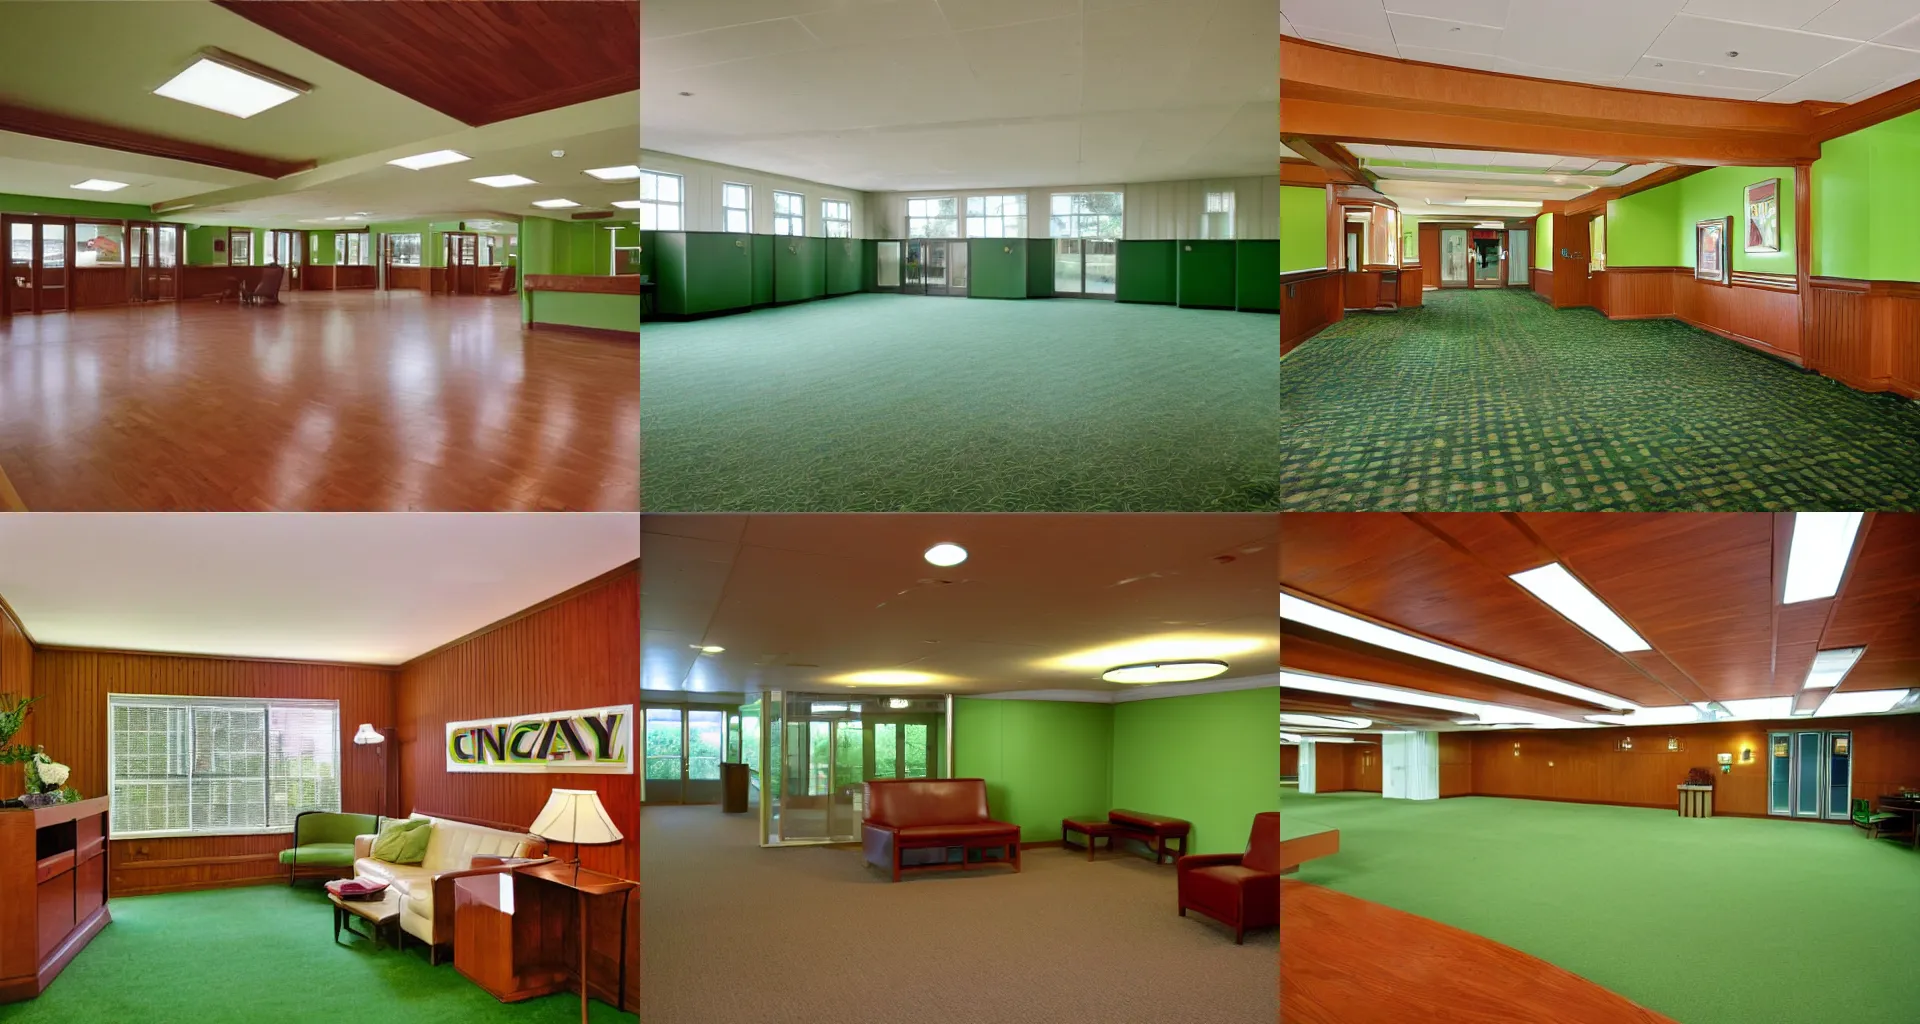 Prompt: 1 9 7 0 s closed country club interior, fluorescent box lights, wood grain decal walls, green linoleum floors, zillow listing photo, 2 0 0 8